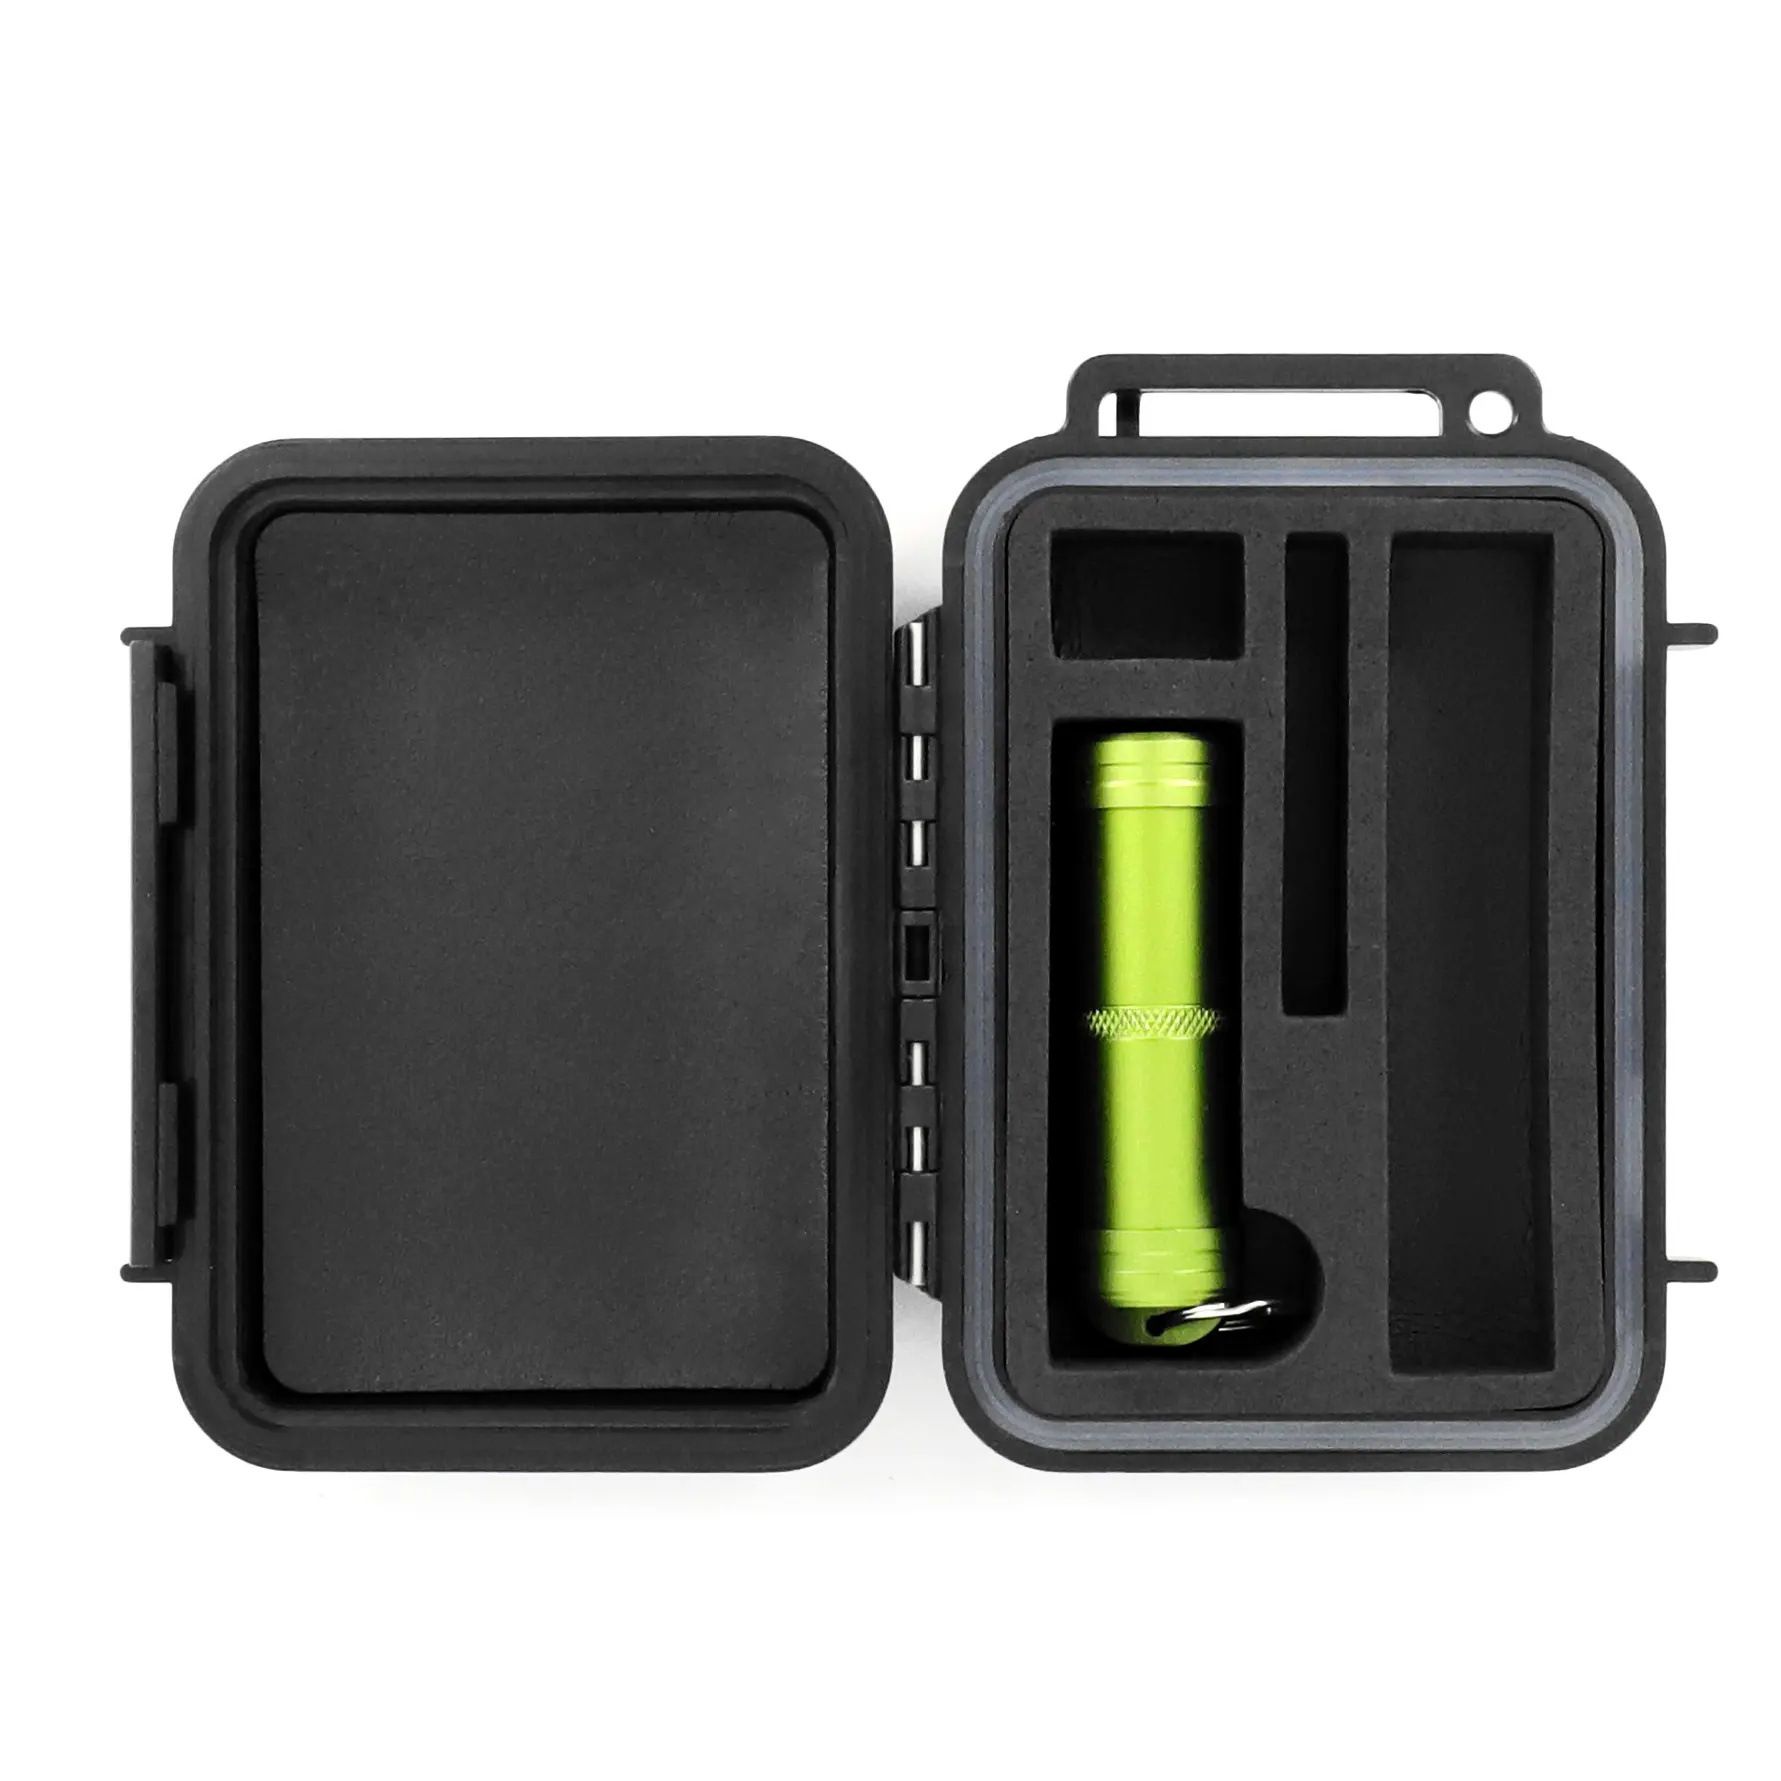 OEM ODM Carbon Lined Plastic Box Smell Proof Box Case with Lock, Foam, Grinder, Airtight Jar, Storage Tube